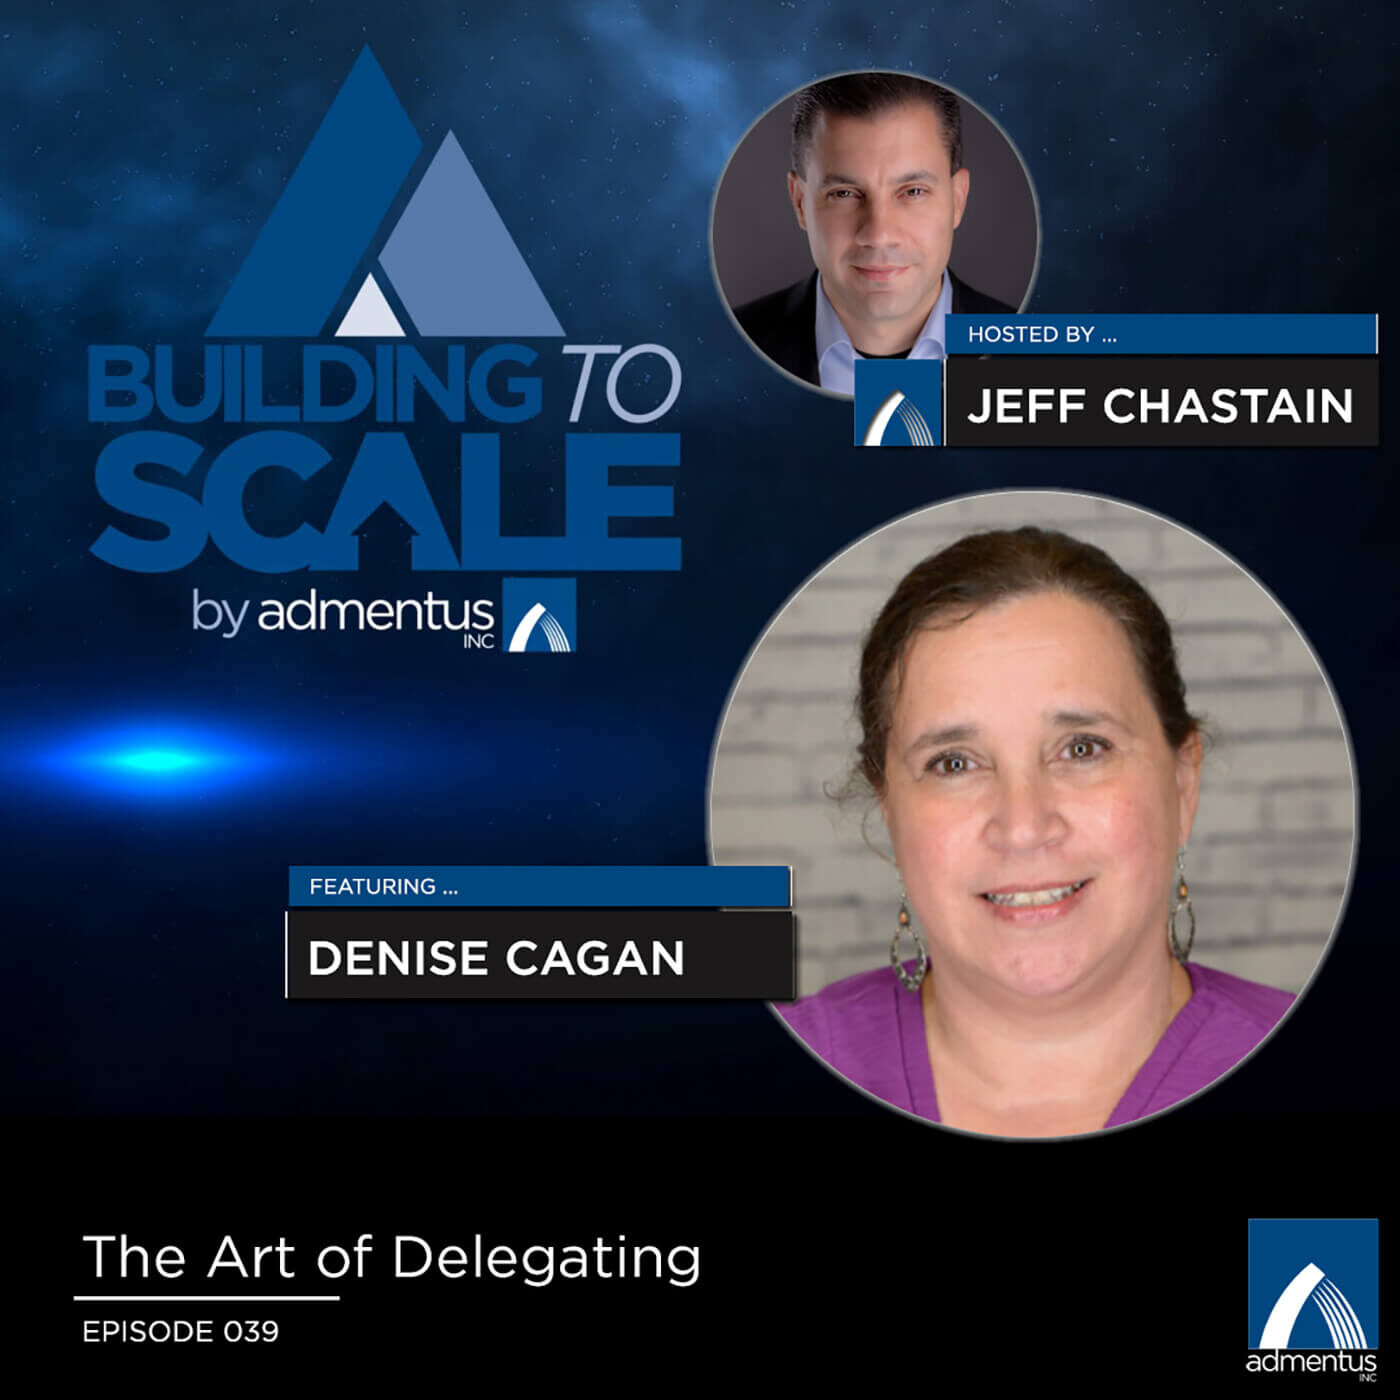 Building to Scale by Admentus Inc. Hosted by Jeff Chastain, featuring Denise Cagan. Episode 39: The Art of Delegating. Media